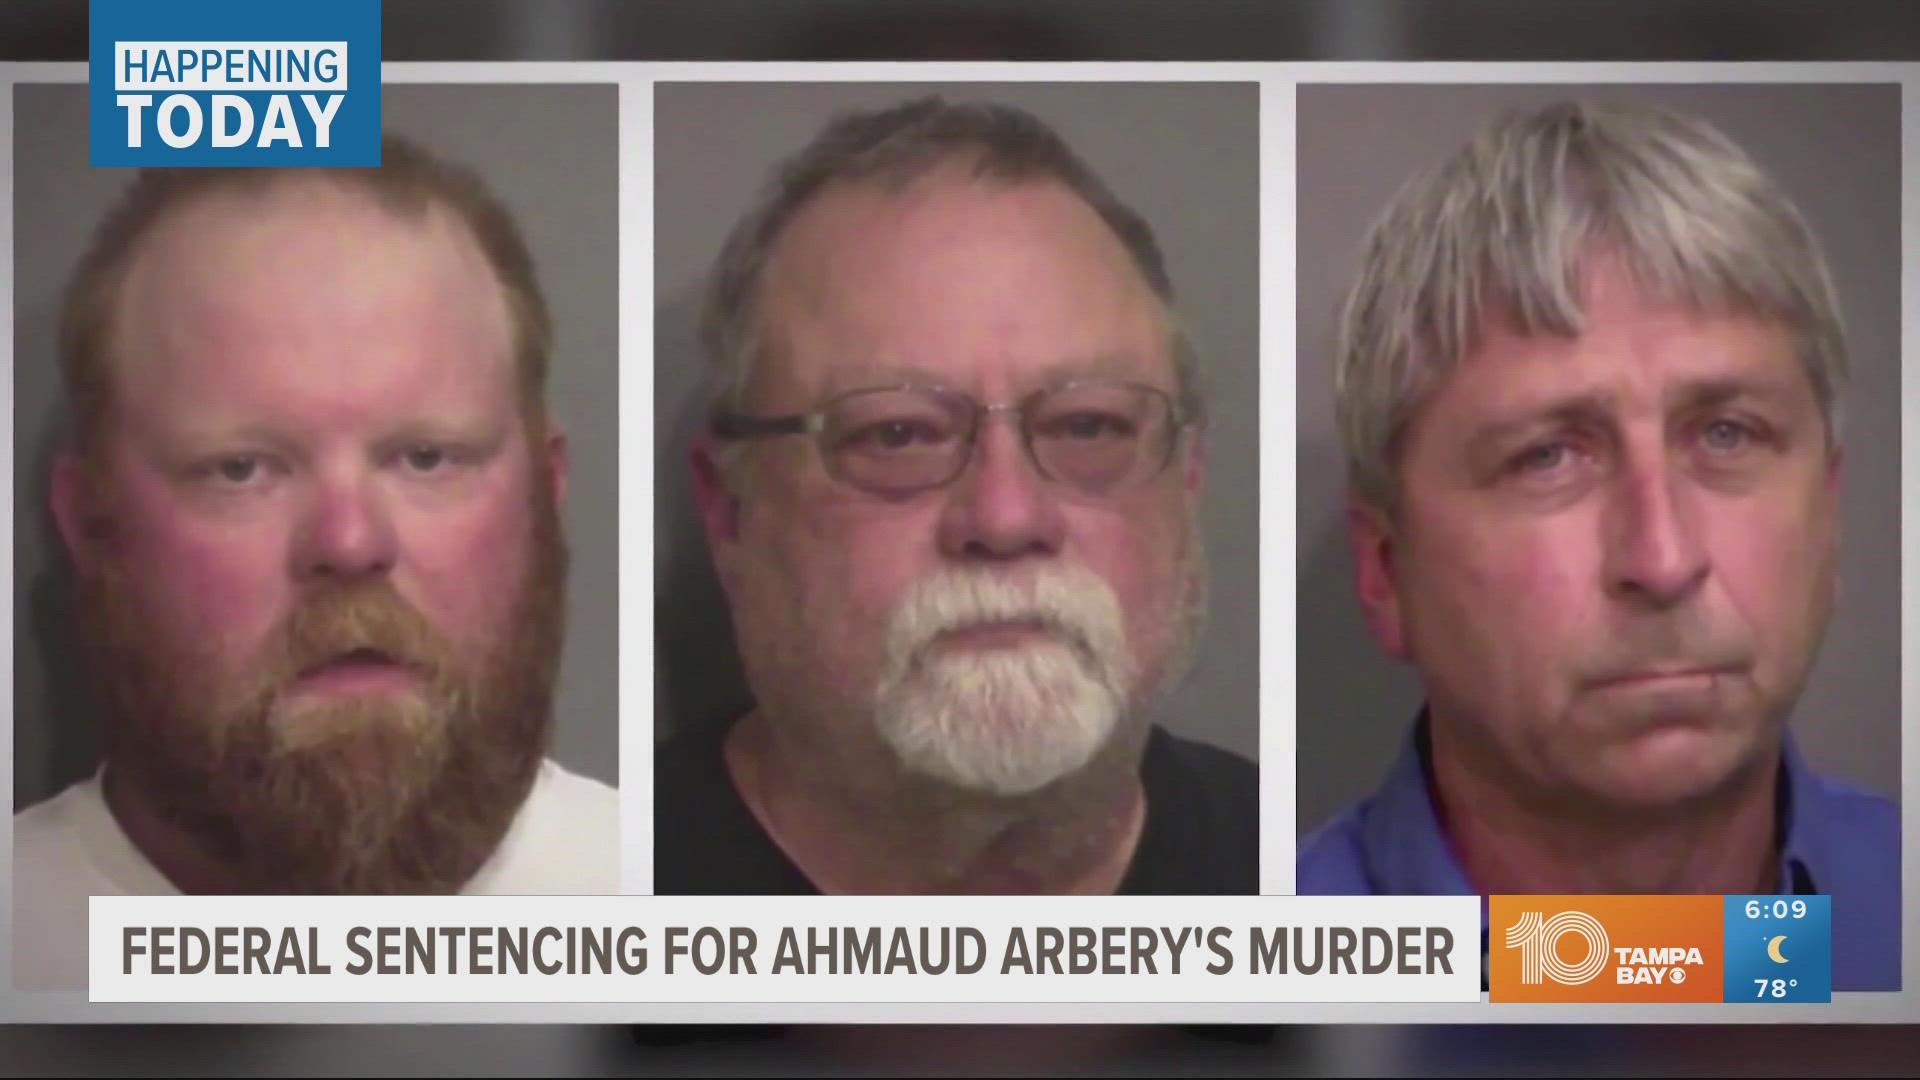 The men are already sentenced to life on state charges for the murder. The recommended federal sentence is a life term on top of the state charges.